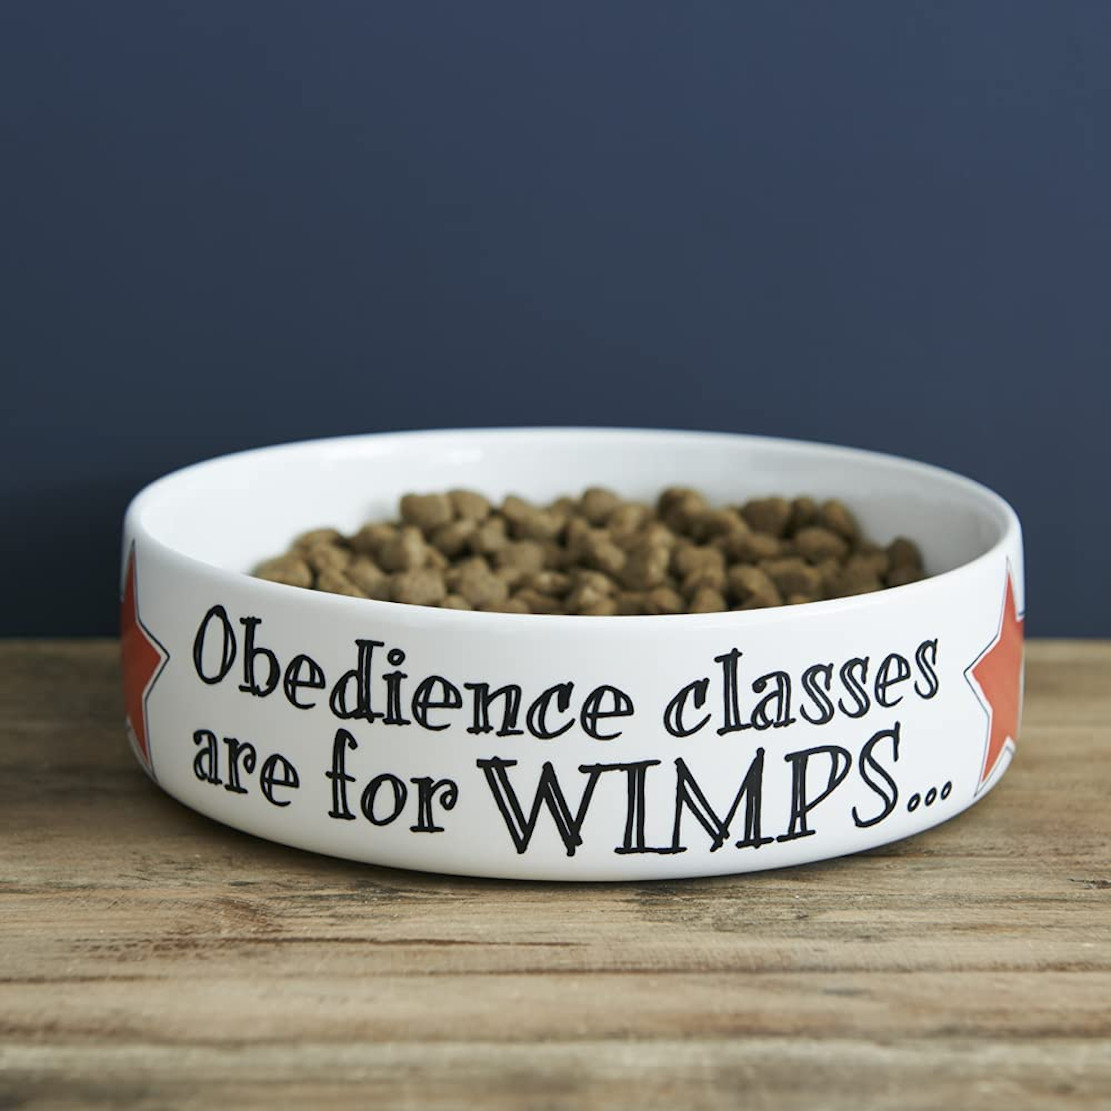 Sweet William Obedience Classes Are For Wimps - Large Dog Bowl